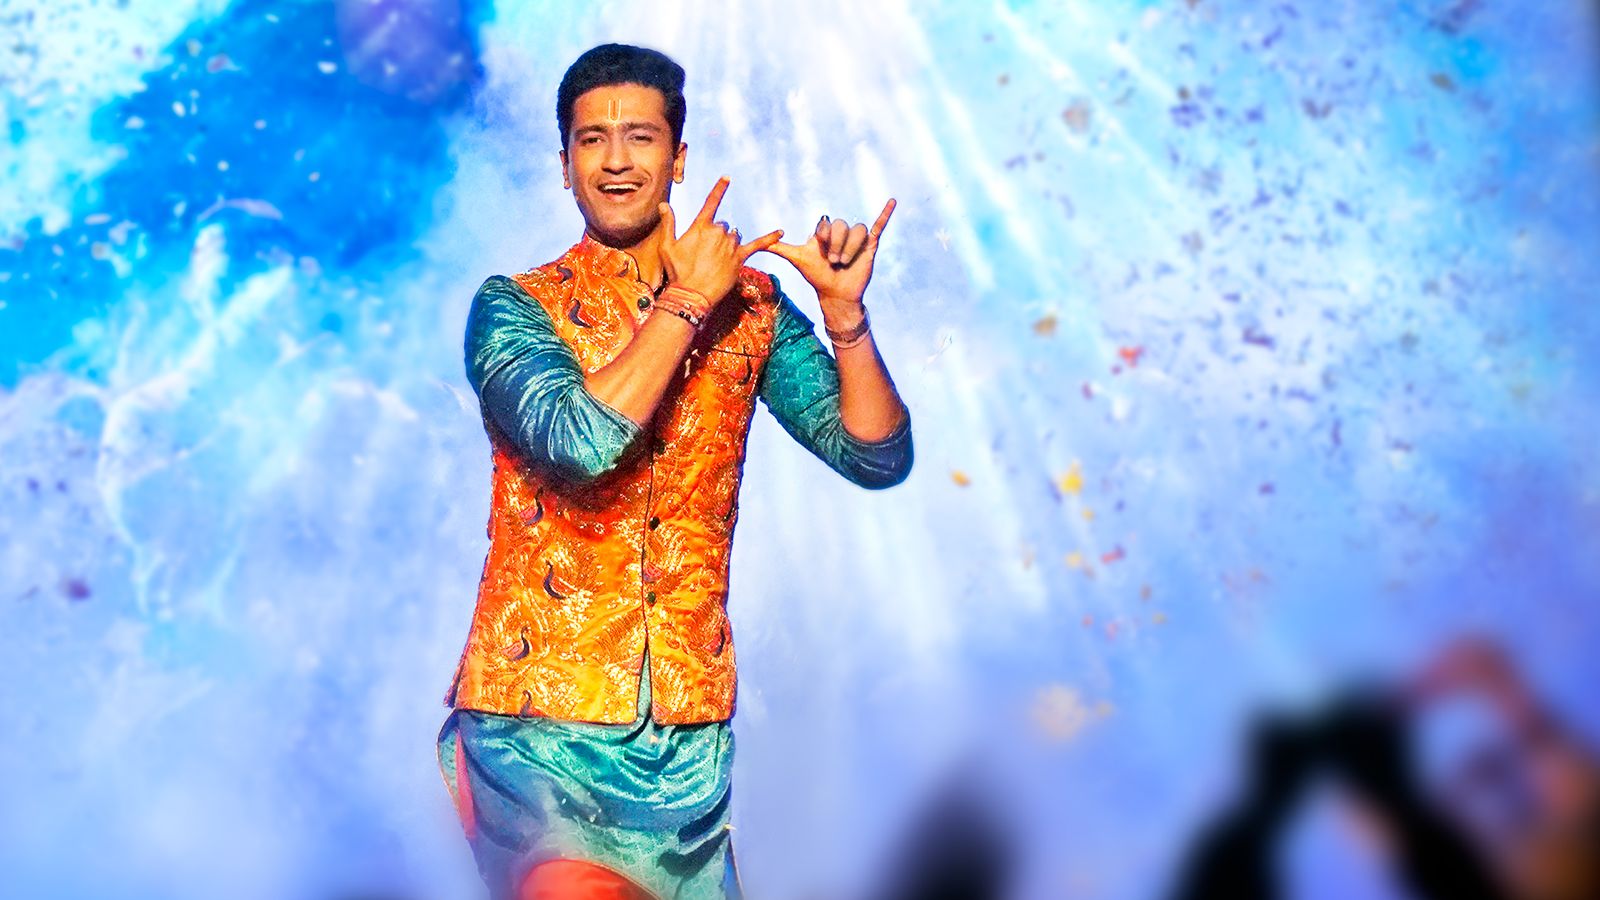 Vicky Kaushal To Mesmerize Audiences As Singer Bhajan Kumar In The Great Indian Family